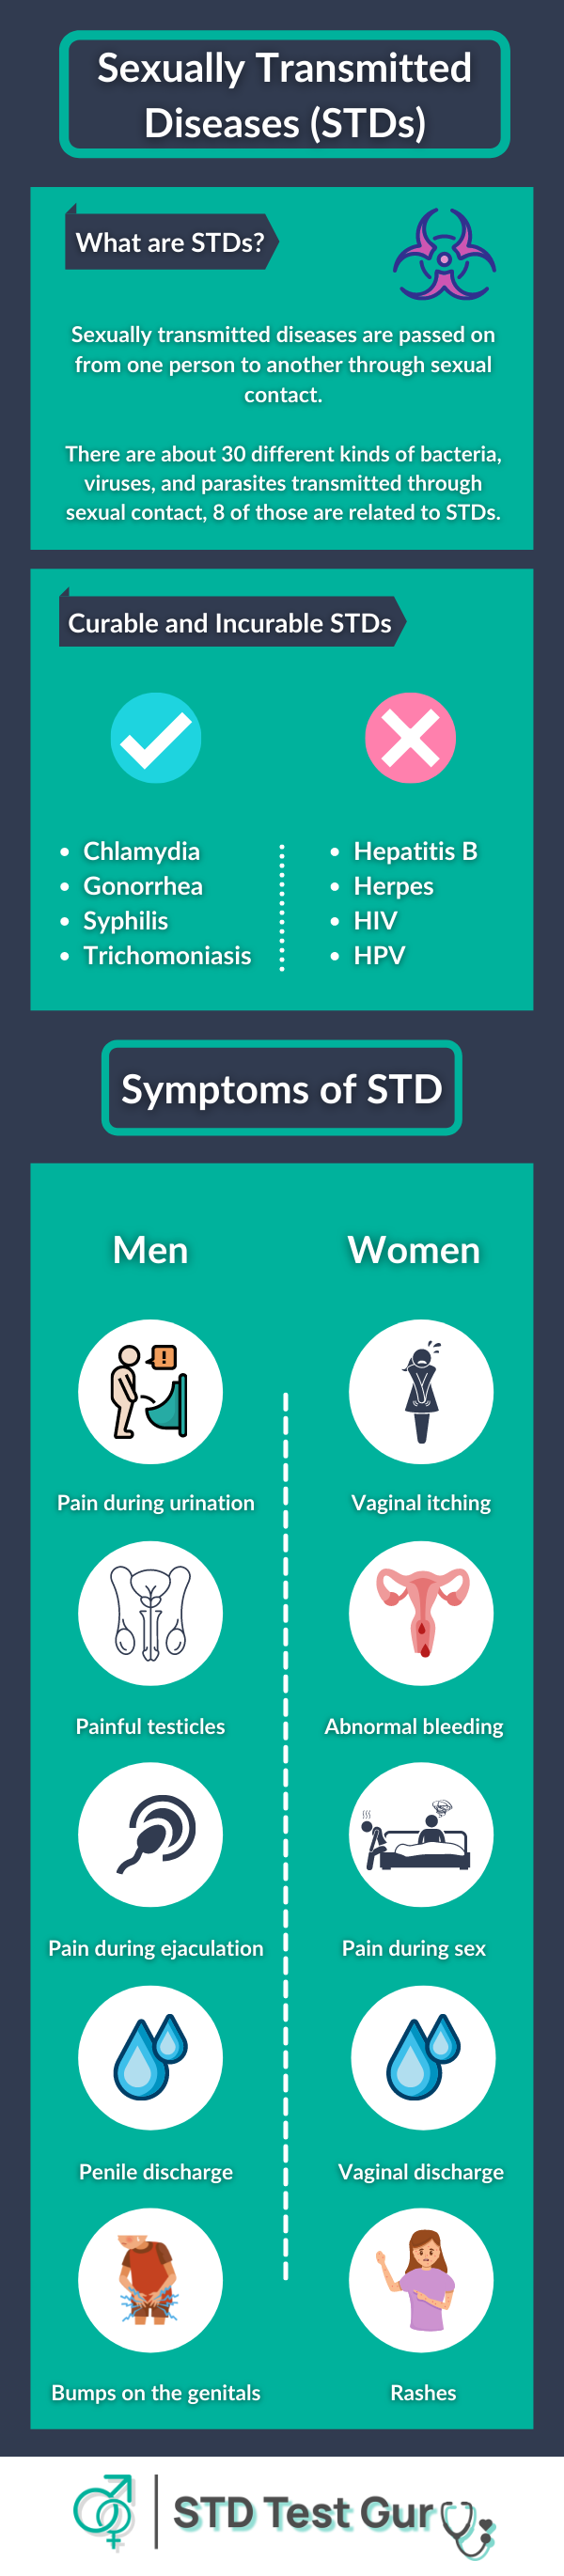 Curable and Incurable STDs and Itching Symptoms